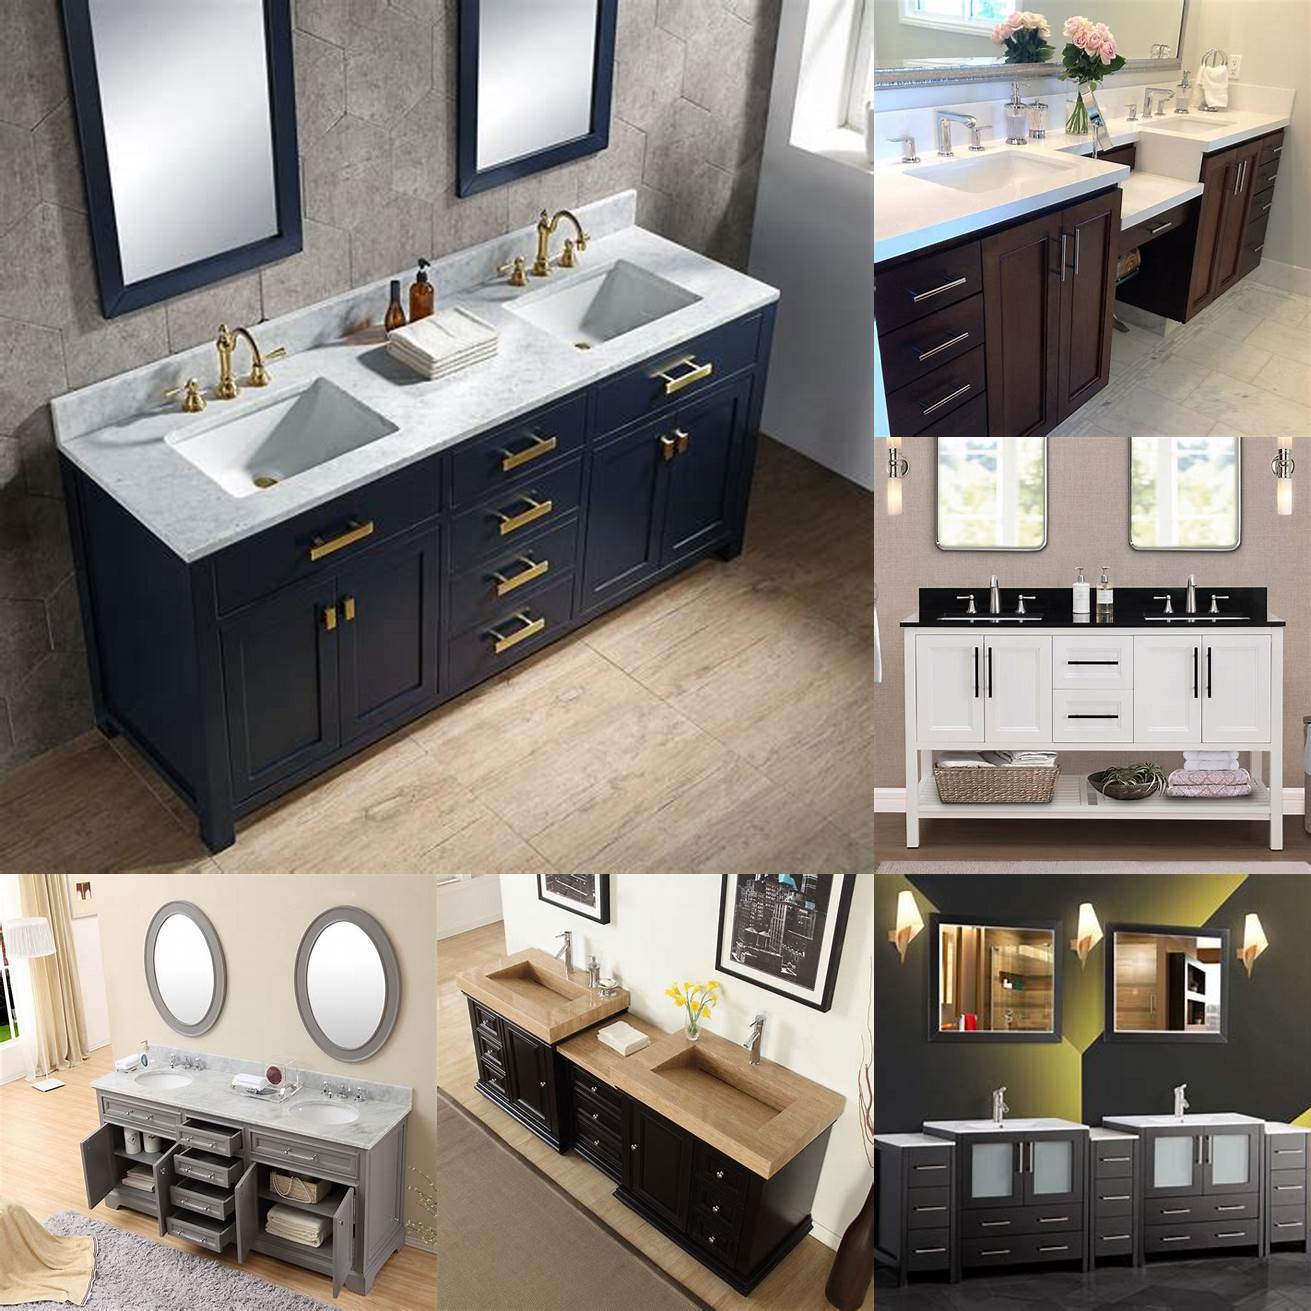 More Counter Space A dual sink bathroom vanity provides more counter space which can be perfect for couples who need extra space for their toiletries